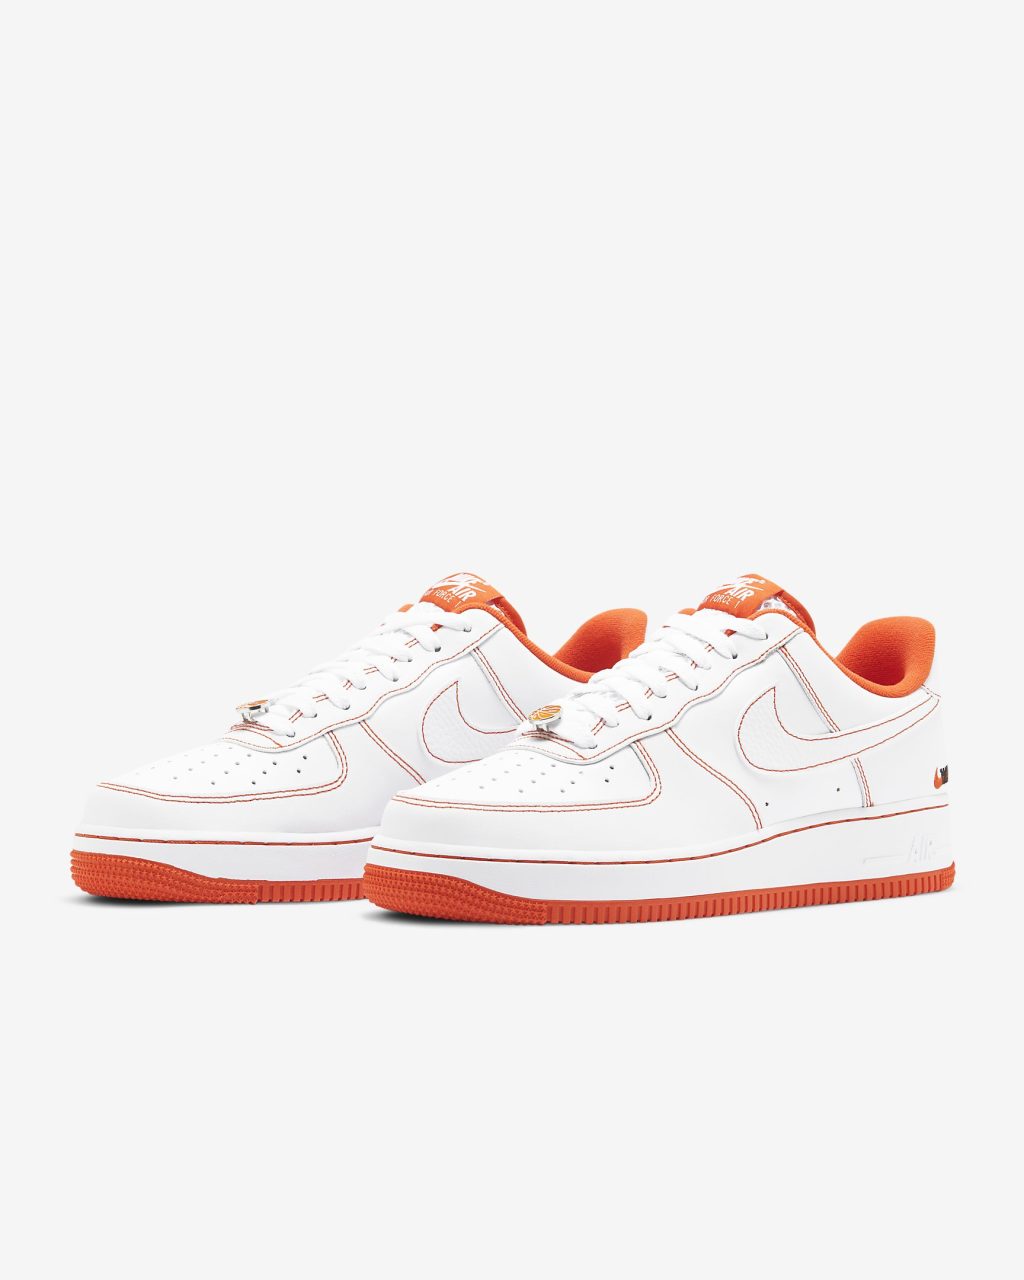 nike-air-force-1-low-rucker-park-ct2585-100-release-20200513